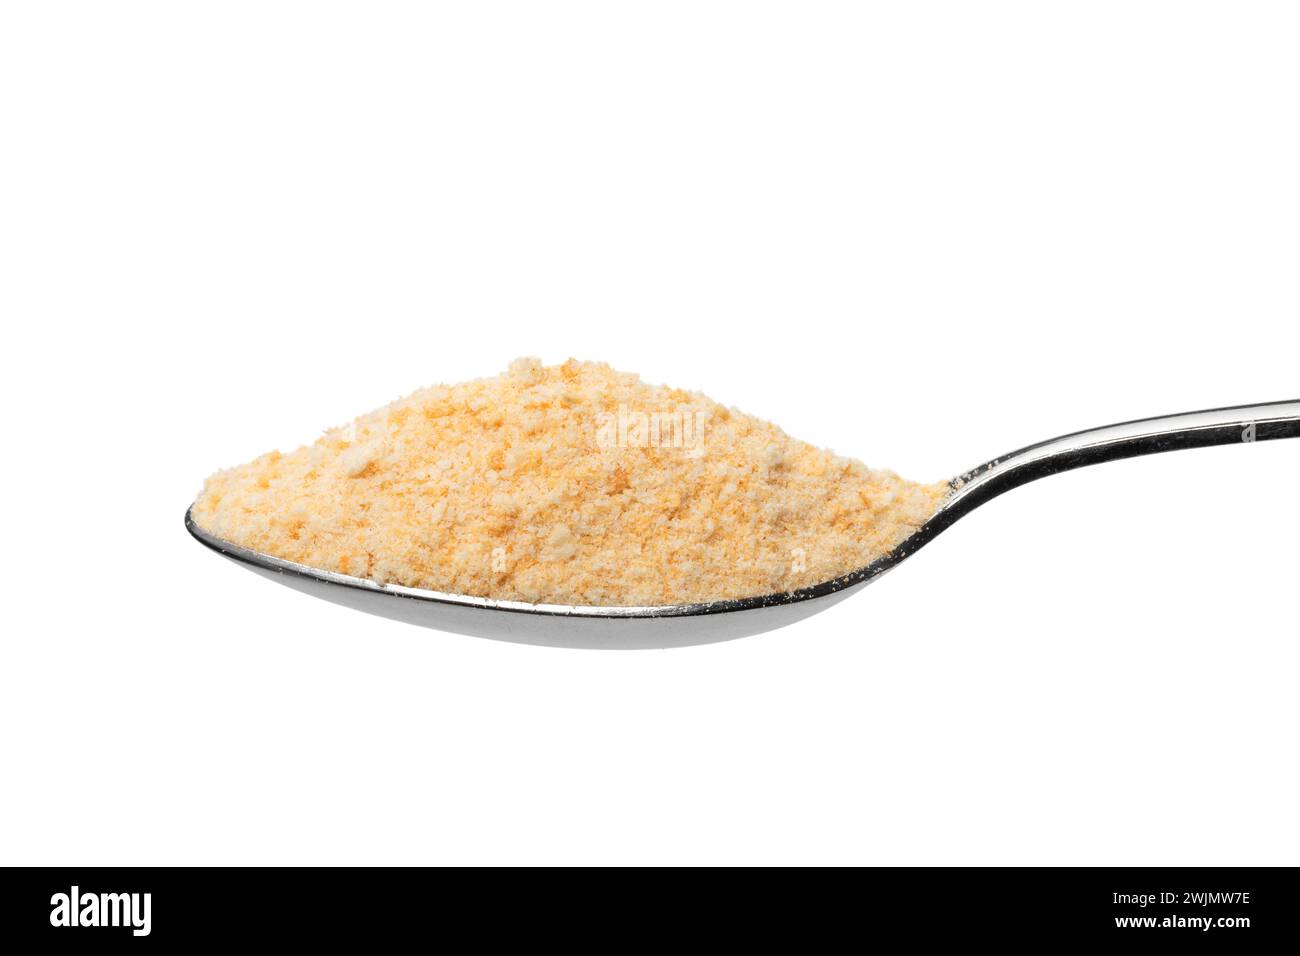 Single metal spoon with breadcrumb on white background close up Stock Photo